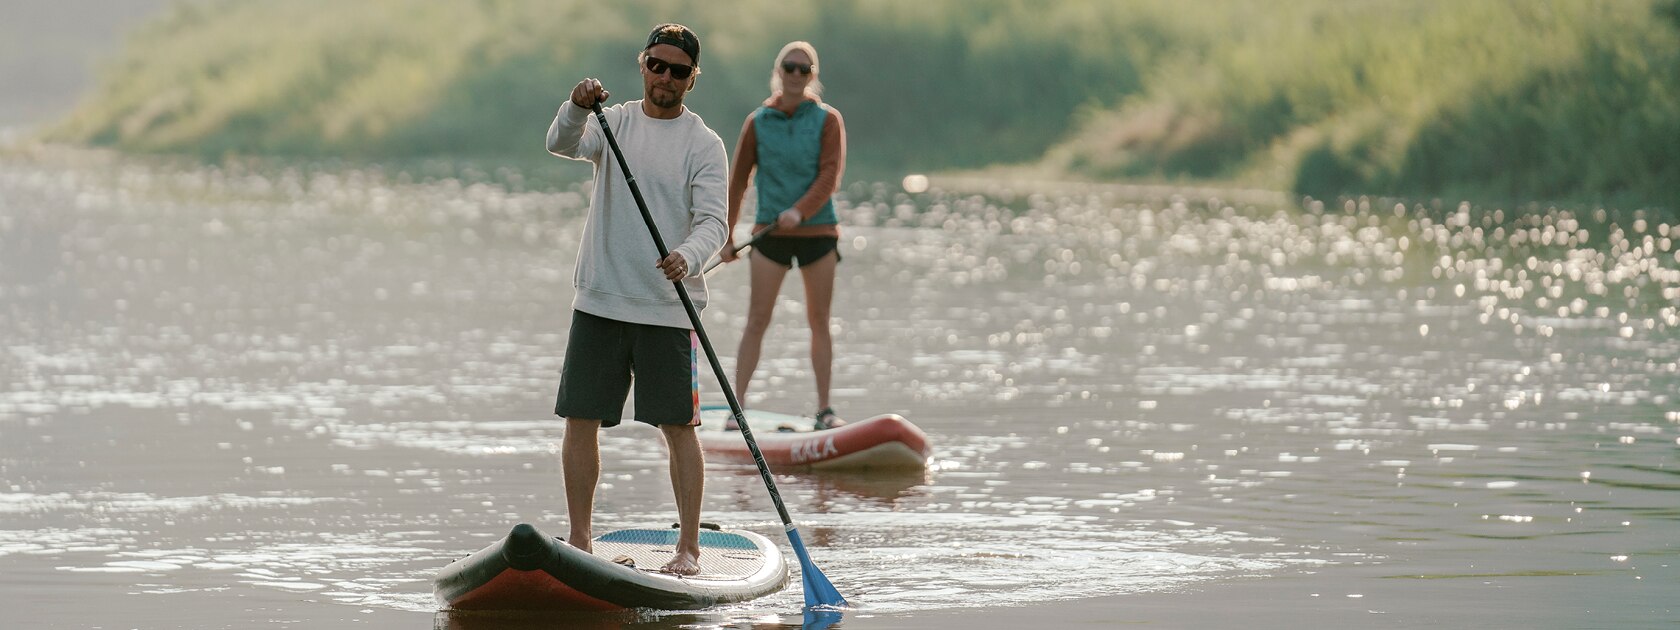 two sunglass wearing stand up paddle-boarders on the water with grassy bank behind them